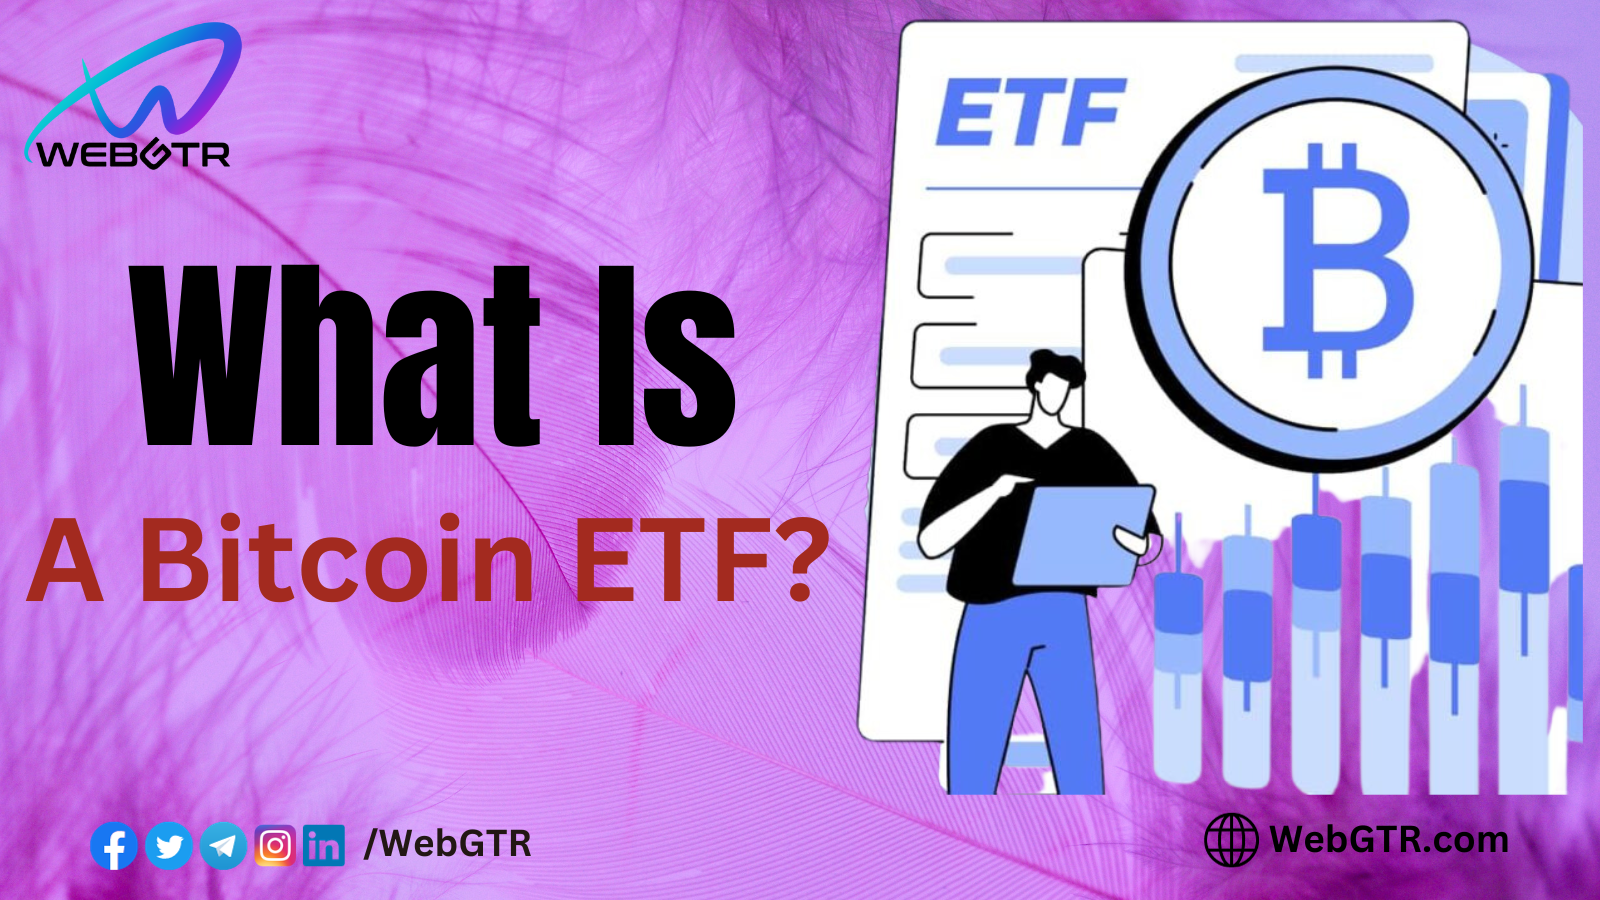 What Is a Bitcoin ETF?